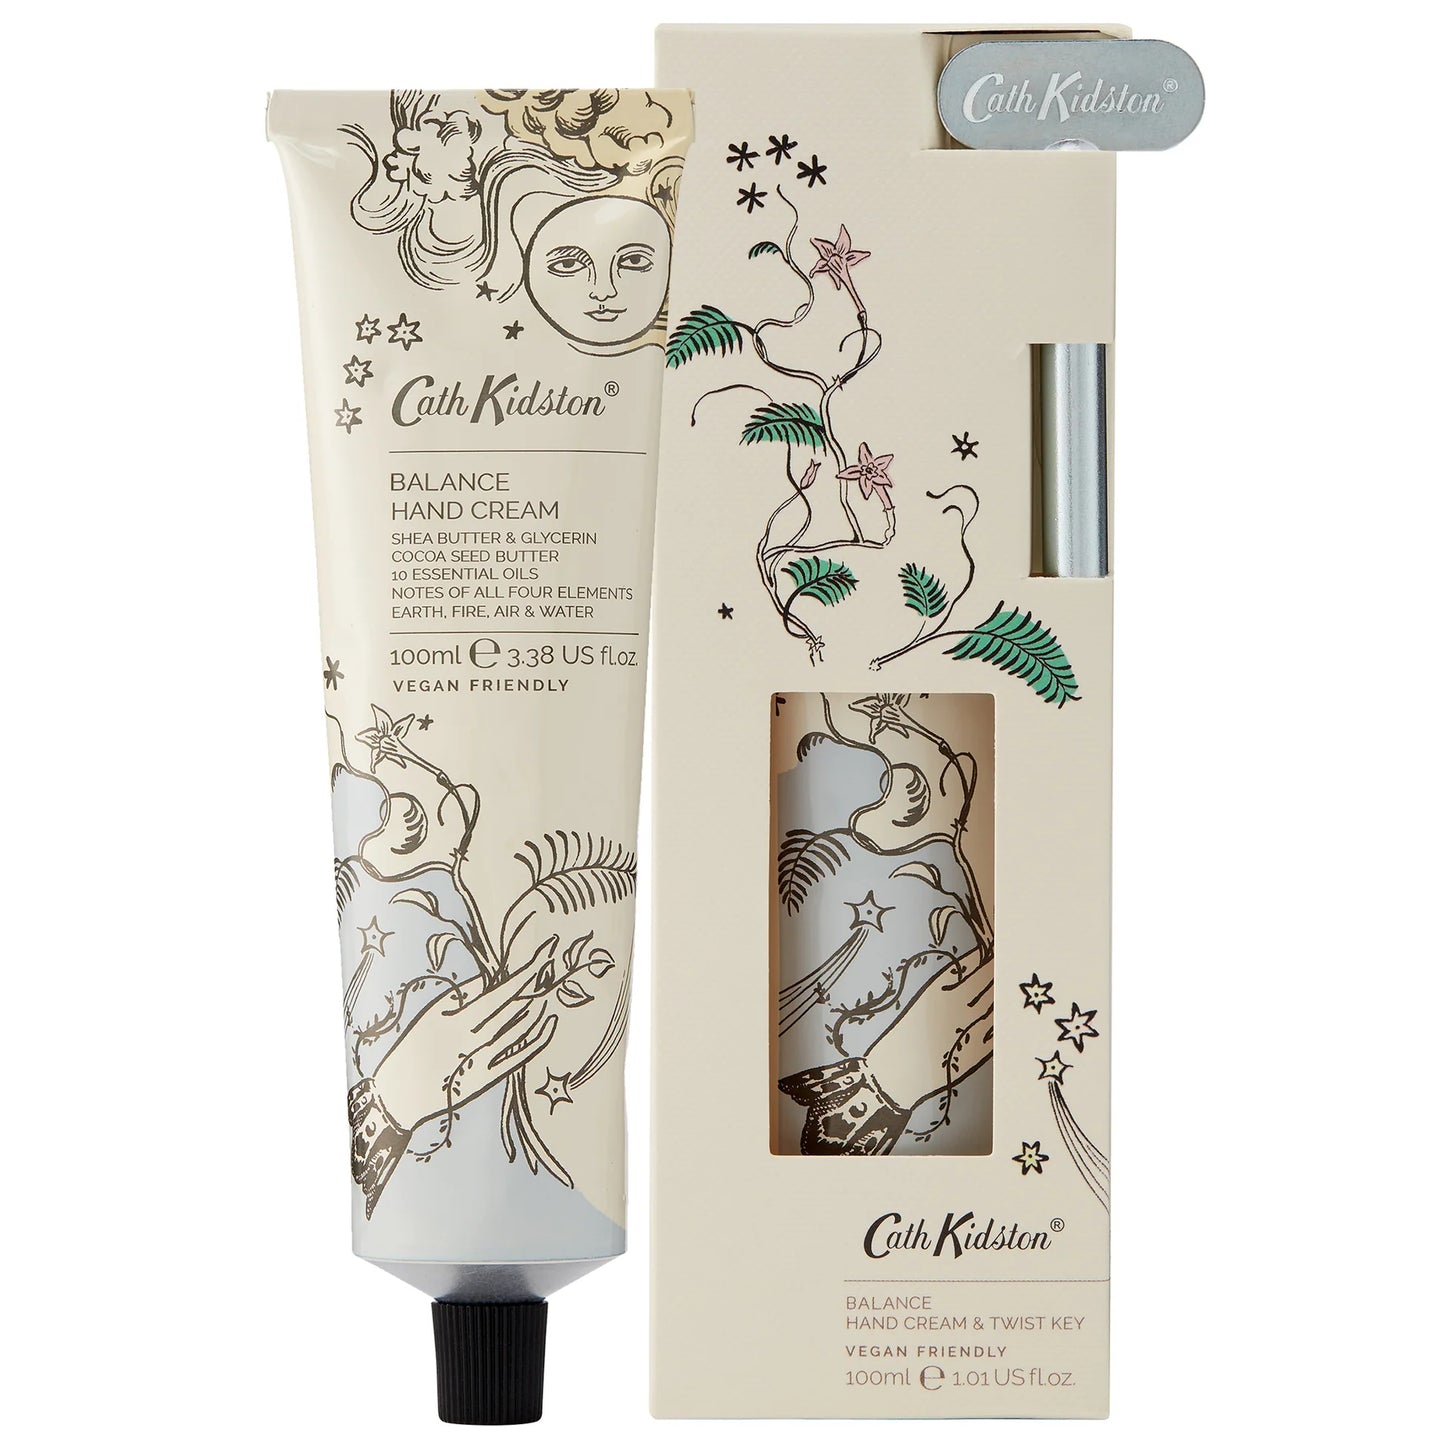 Power To The Peaceful Balance Hand Cream / Lotion with Twist Key